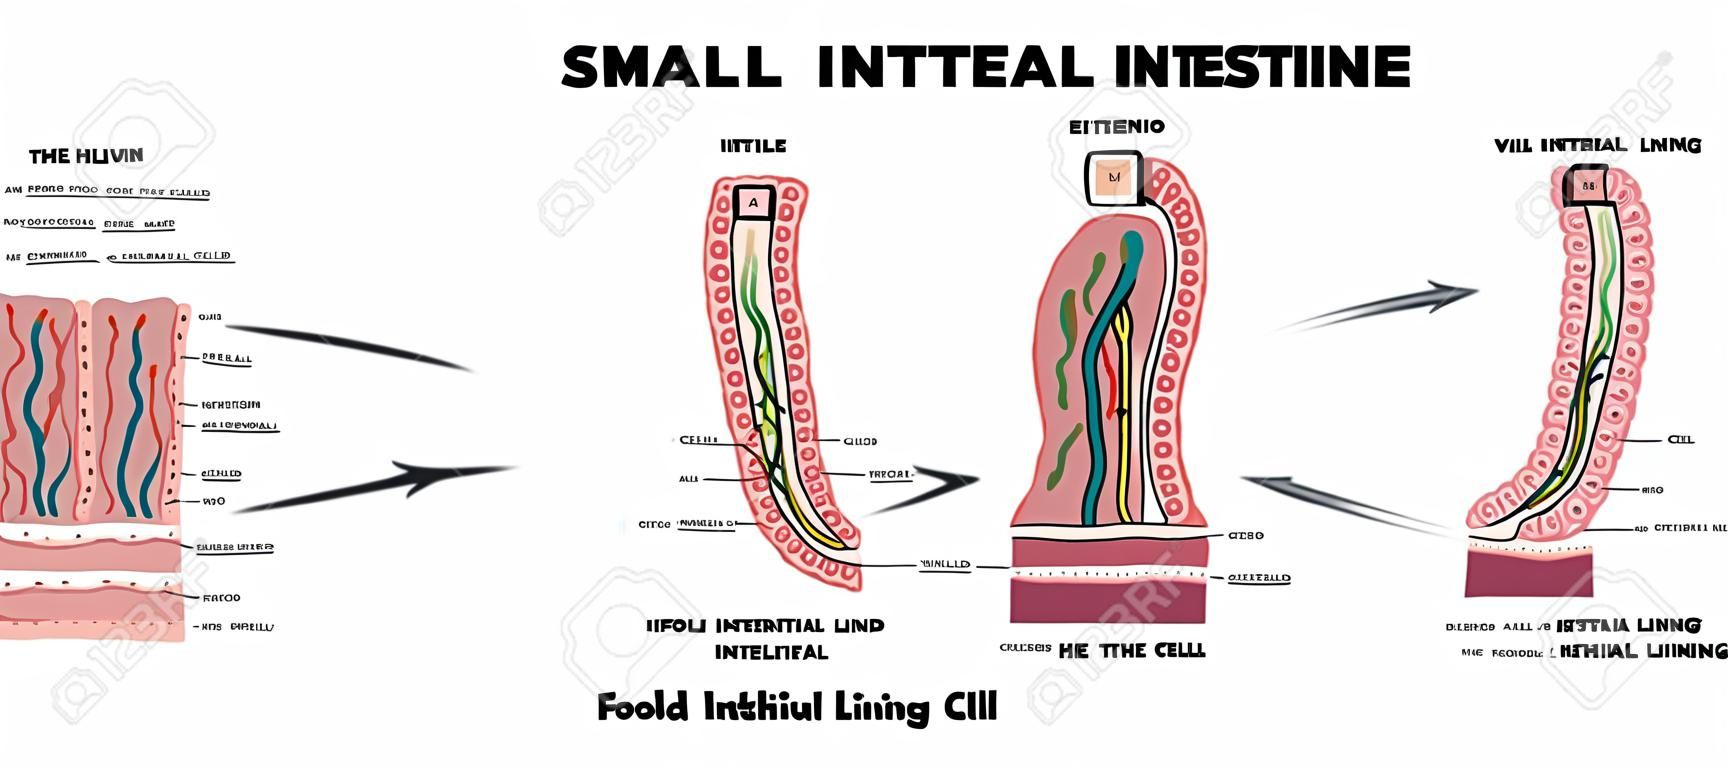 Small intestine lining anatomy, a fold of the intestinal lining, villi and epithelial cell with microvilli detailed illustrations.